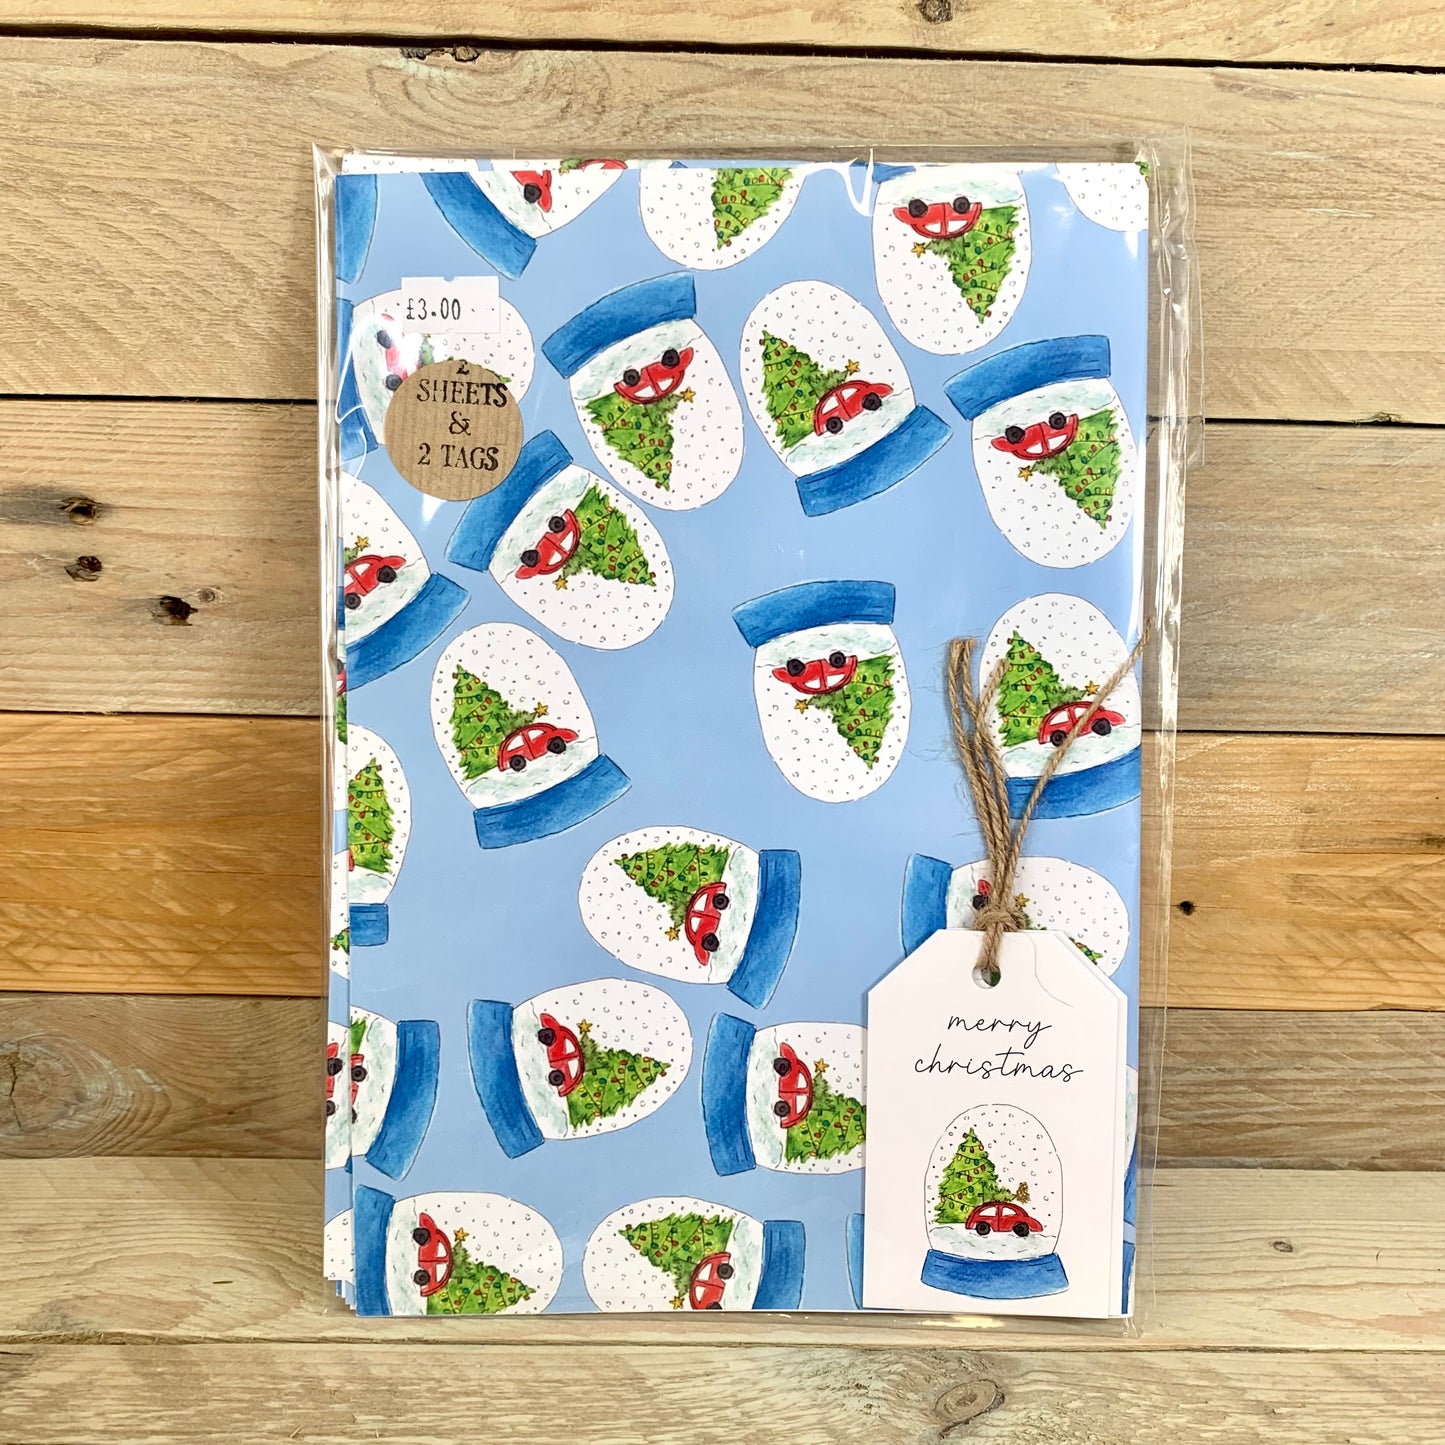 Snowglobe Christmas Wrapping Paper & Gift Tags